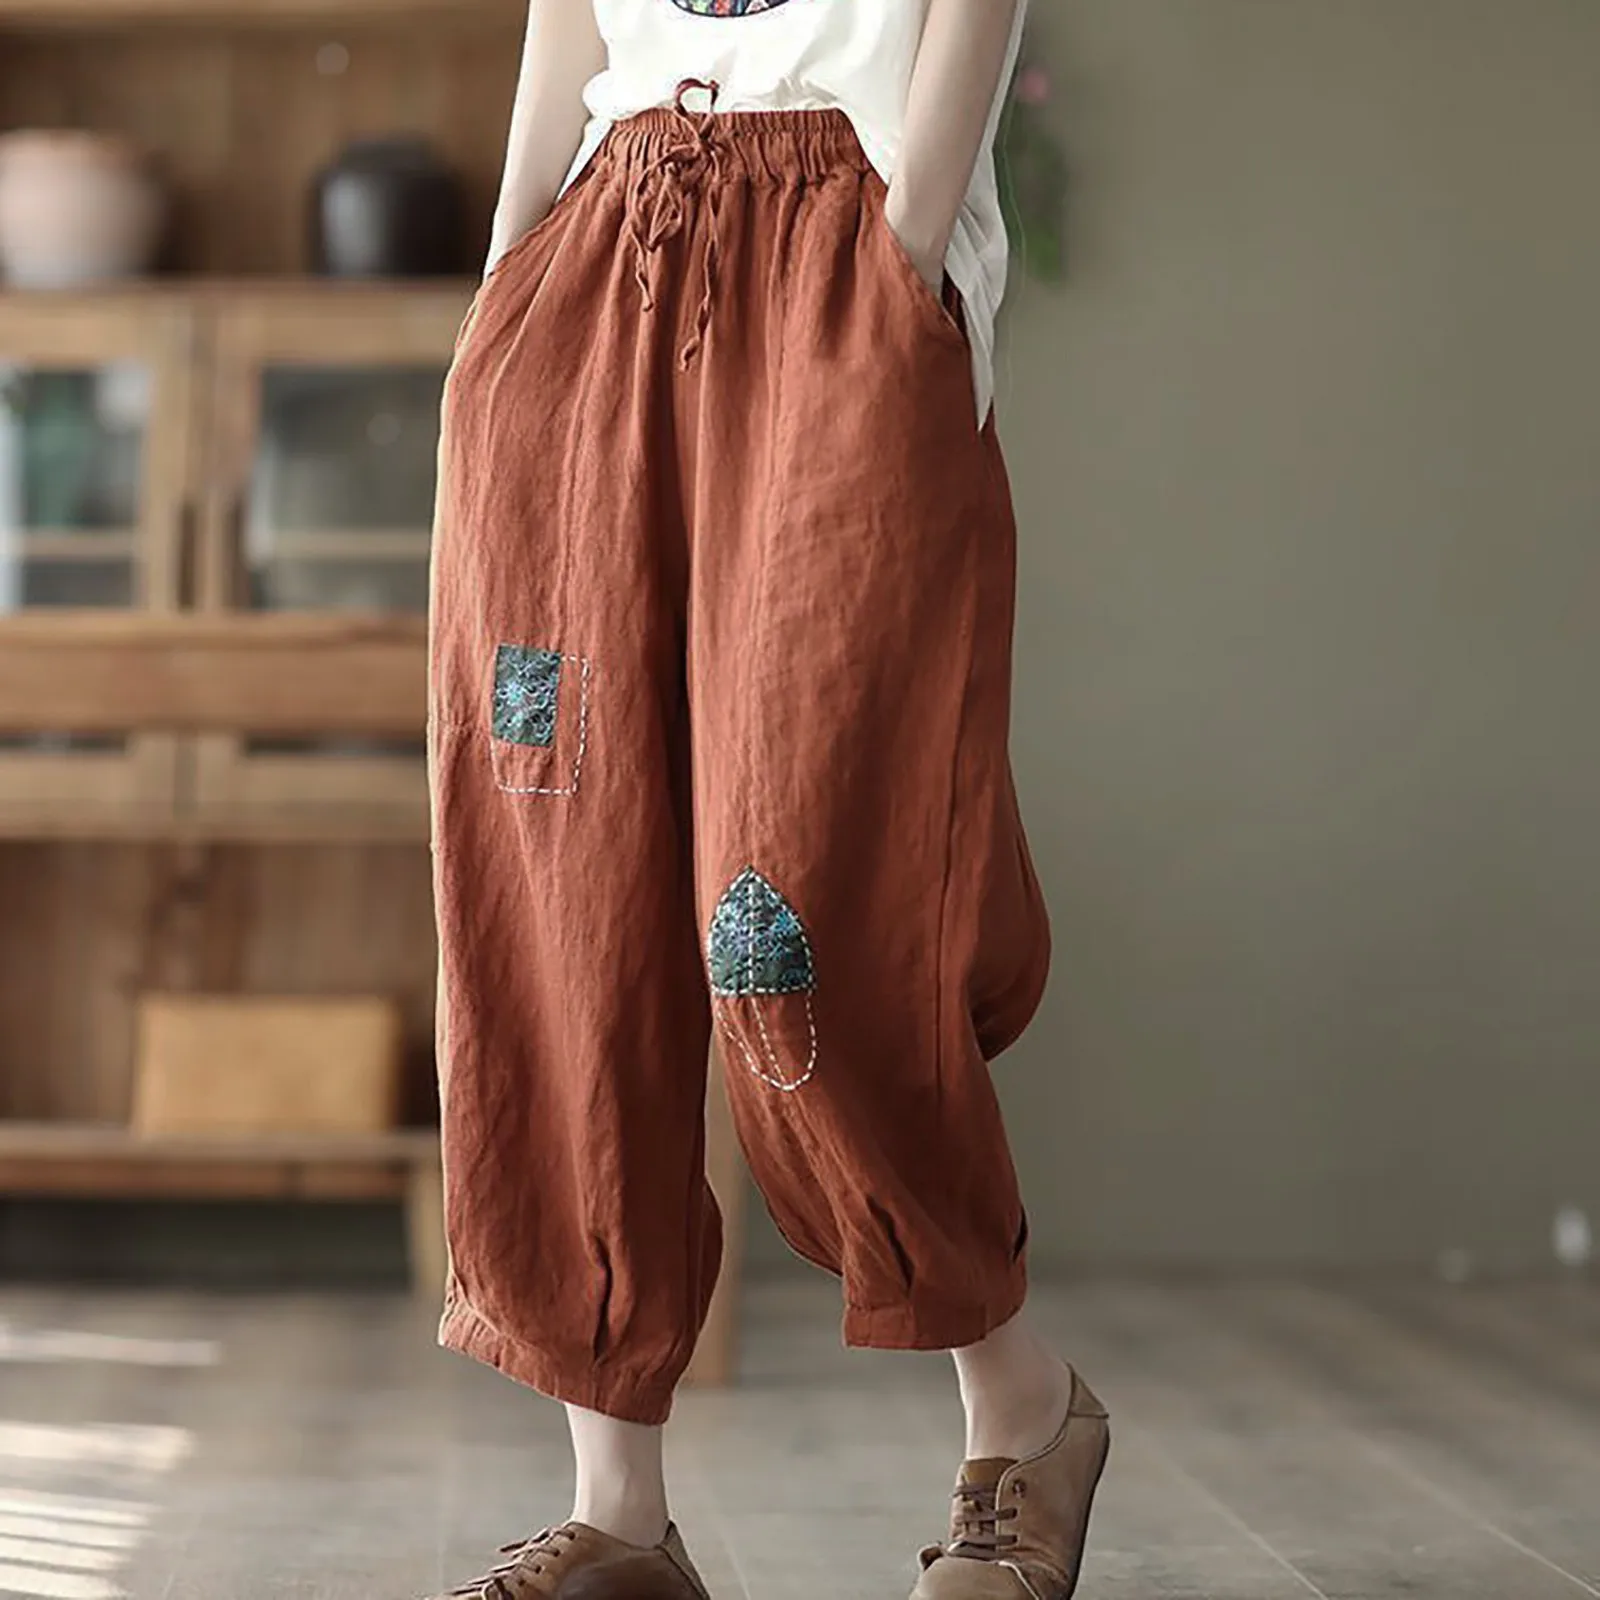 Women's Embroidered Cotton Linen Vintage Ethnic Style Pants Summer Casual Elastic Waist Drawstrings Cropped Pants For Women